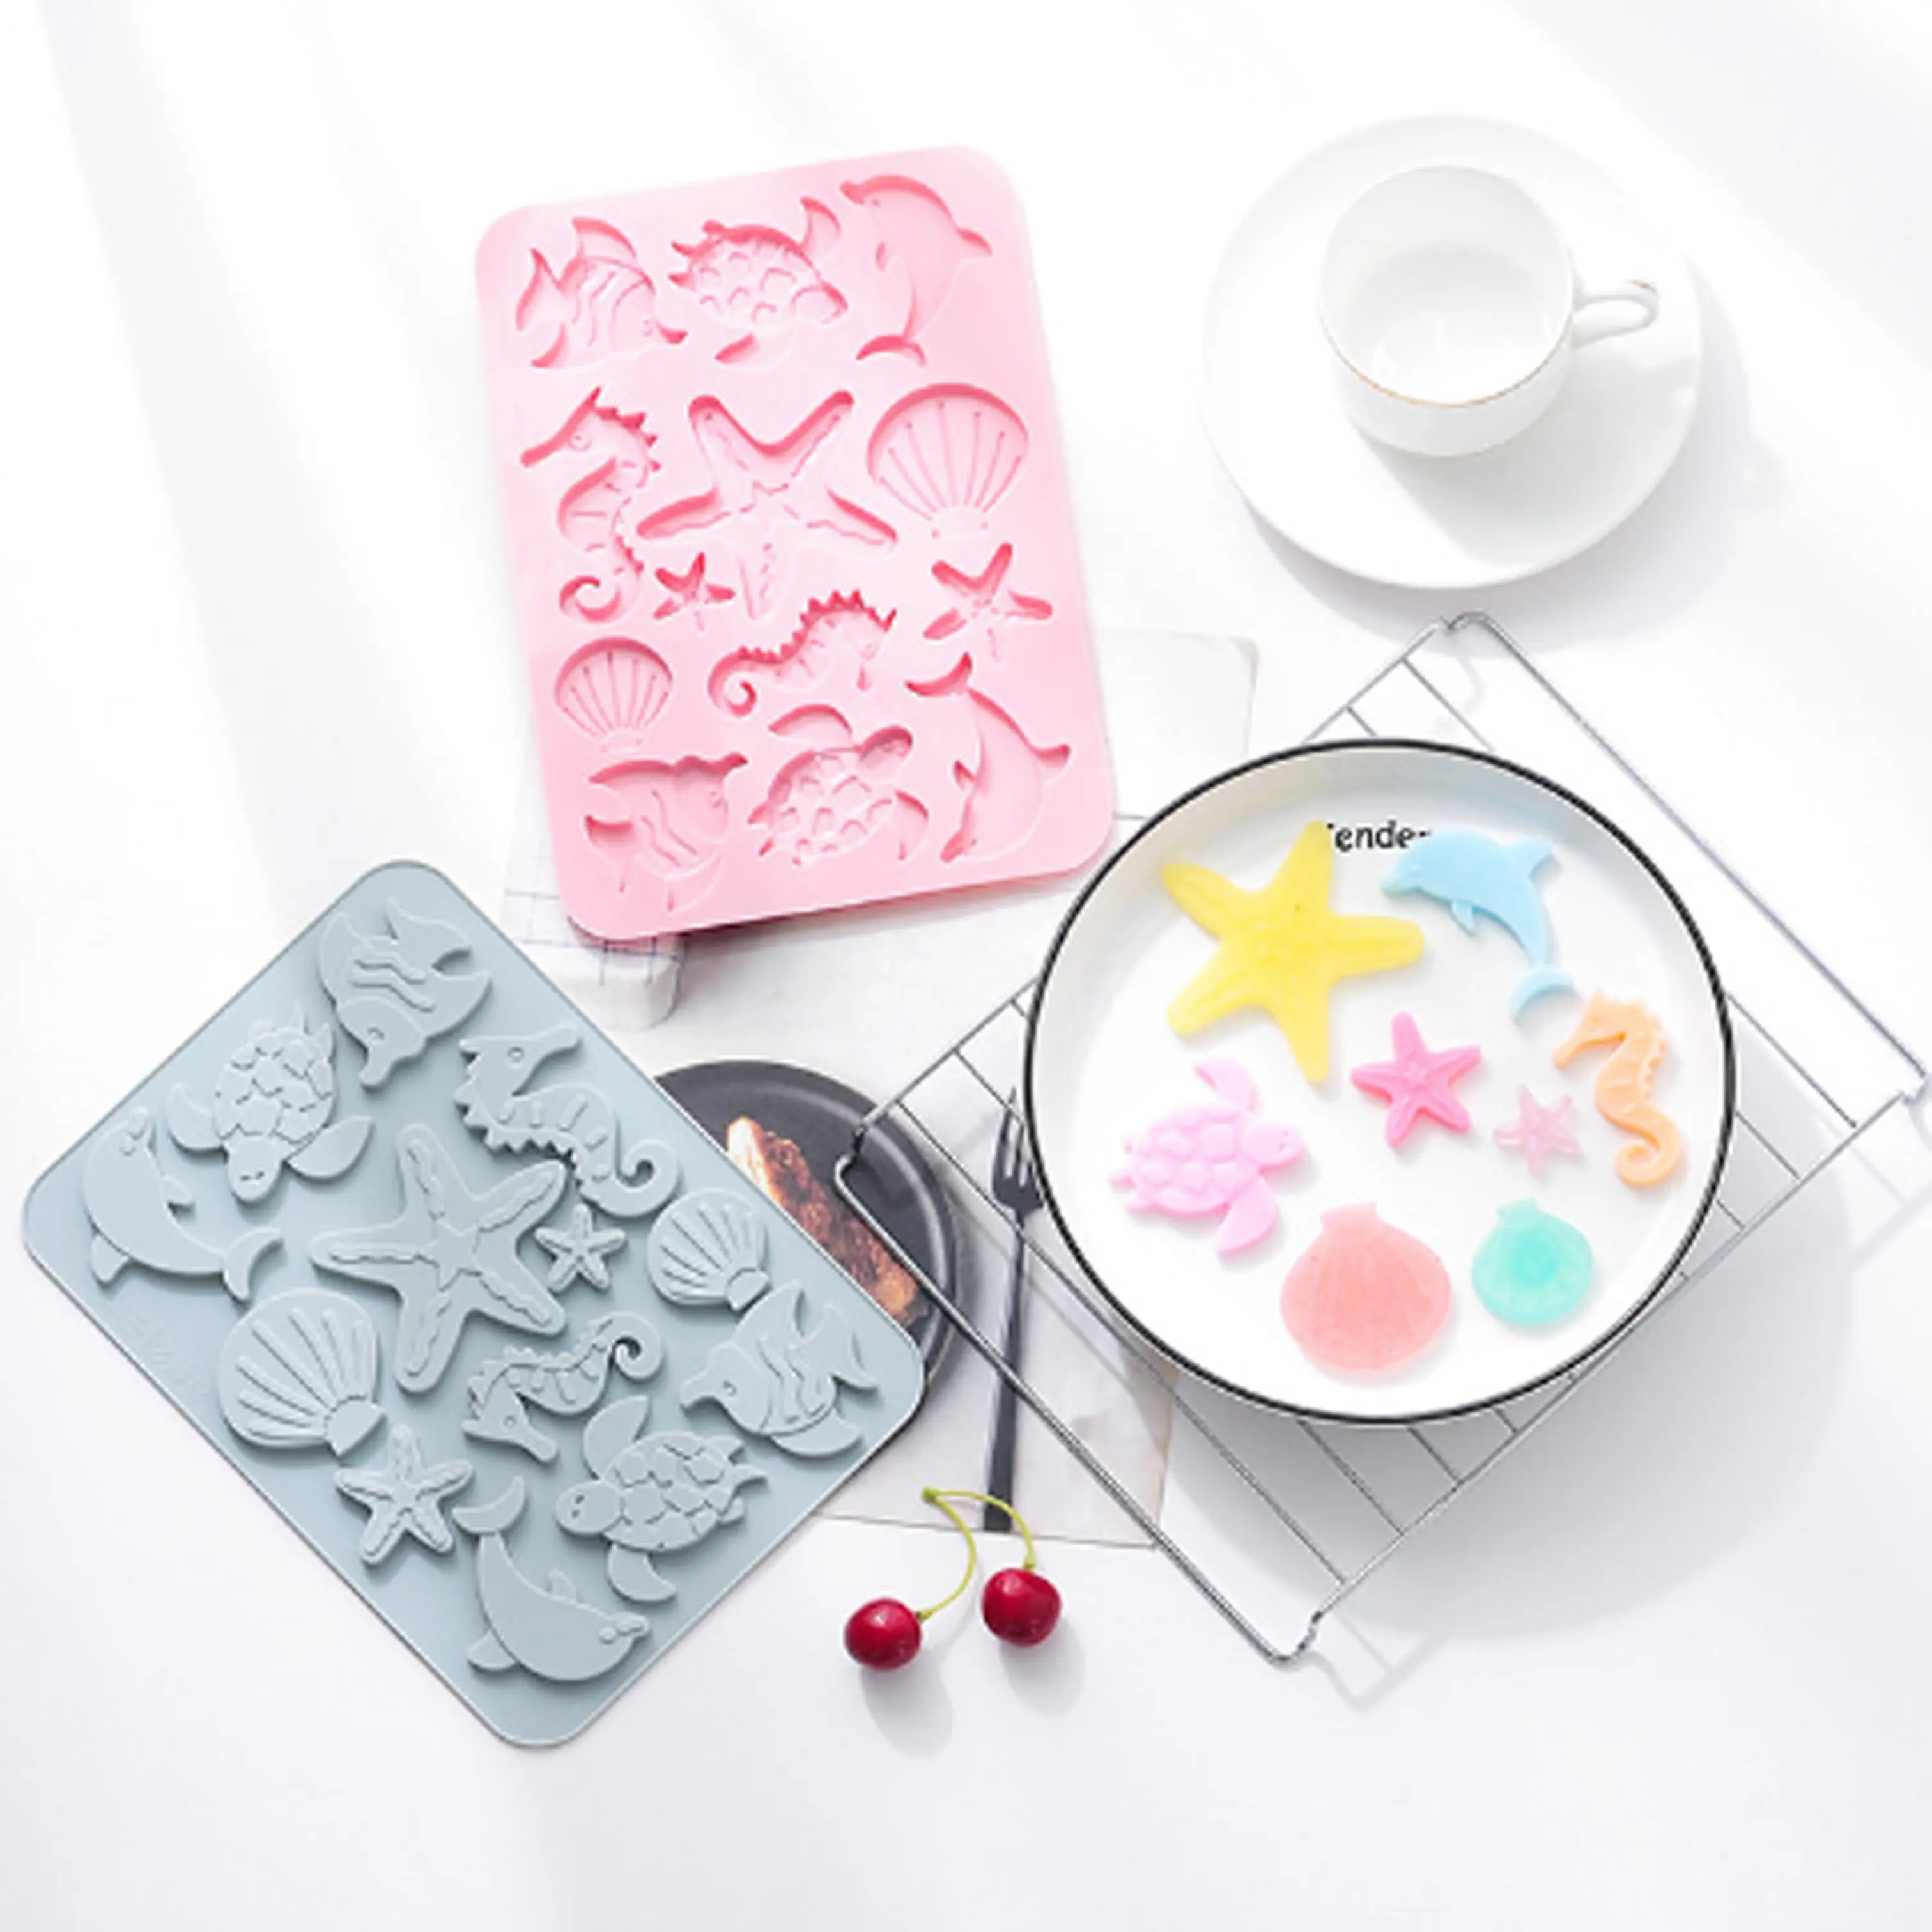 3D Non-Stick Animal Silicone Molds Pendant Making Diy Crystal Mold For Home Chocolate Molds Baking Mould Tools